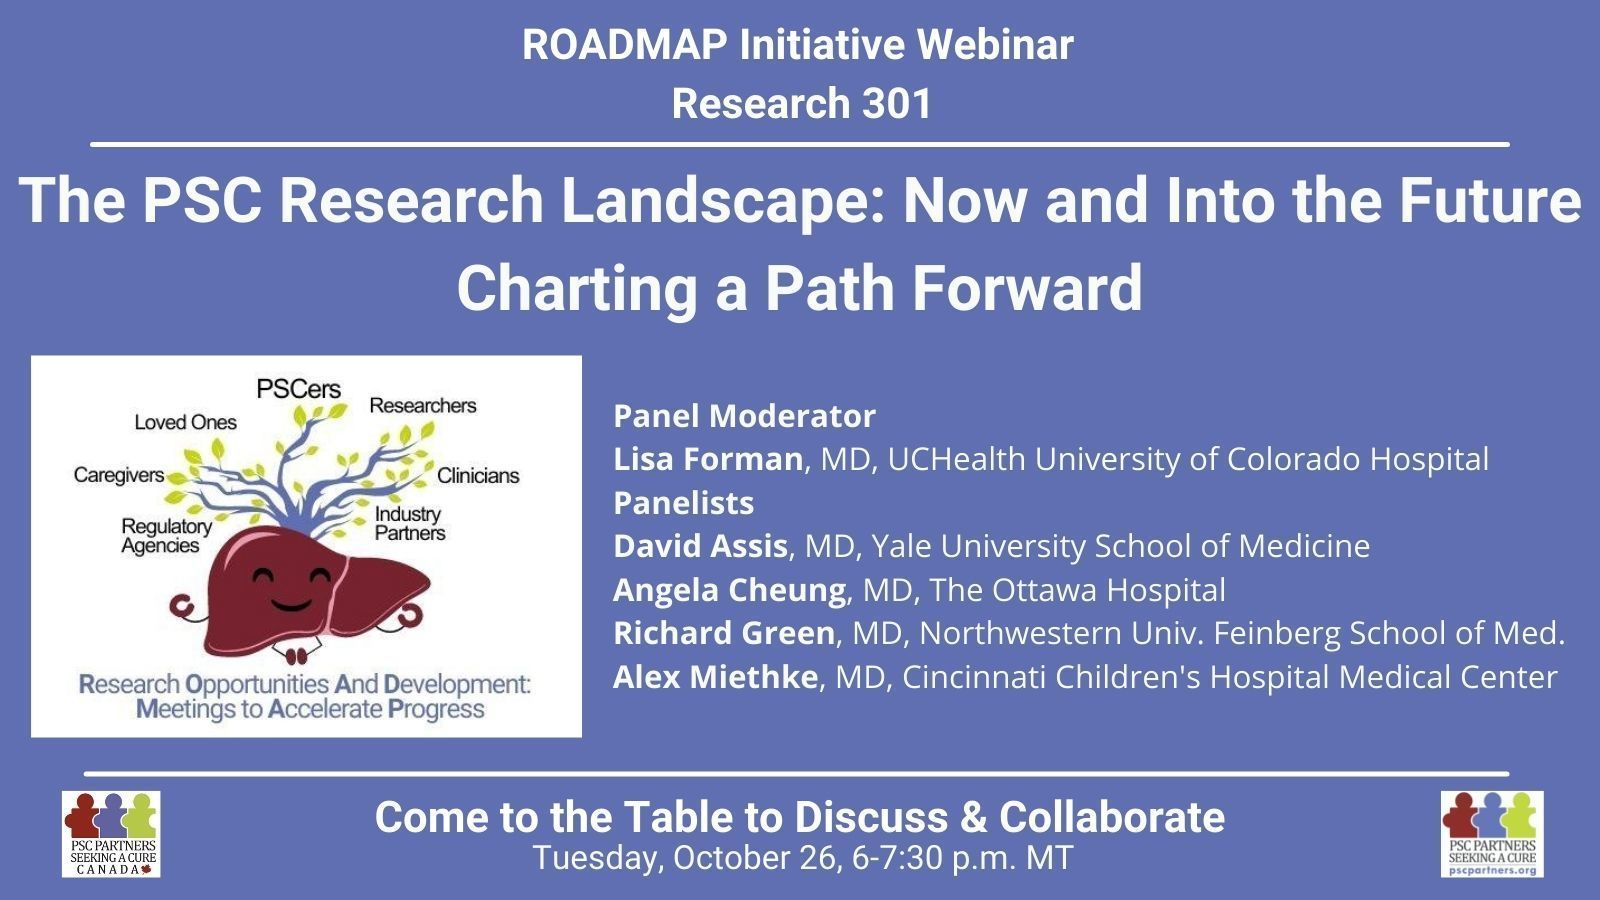 ROADMAP Research 301 -- The PSC Research Landscape: Now and Into the Future